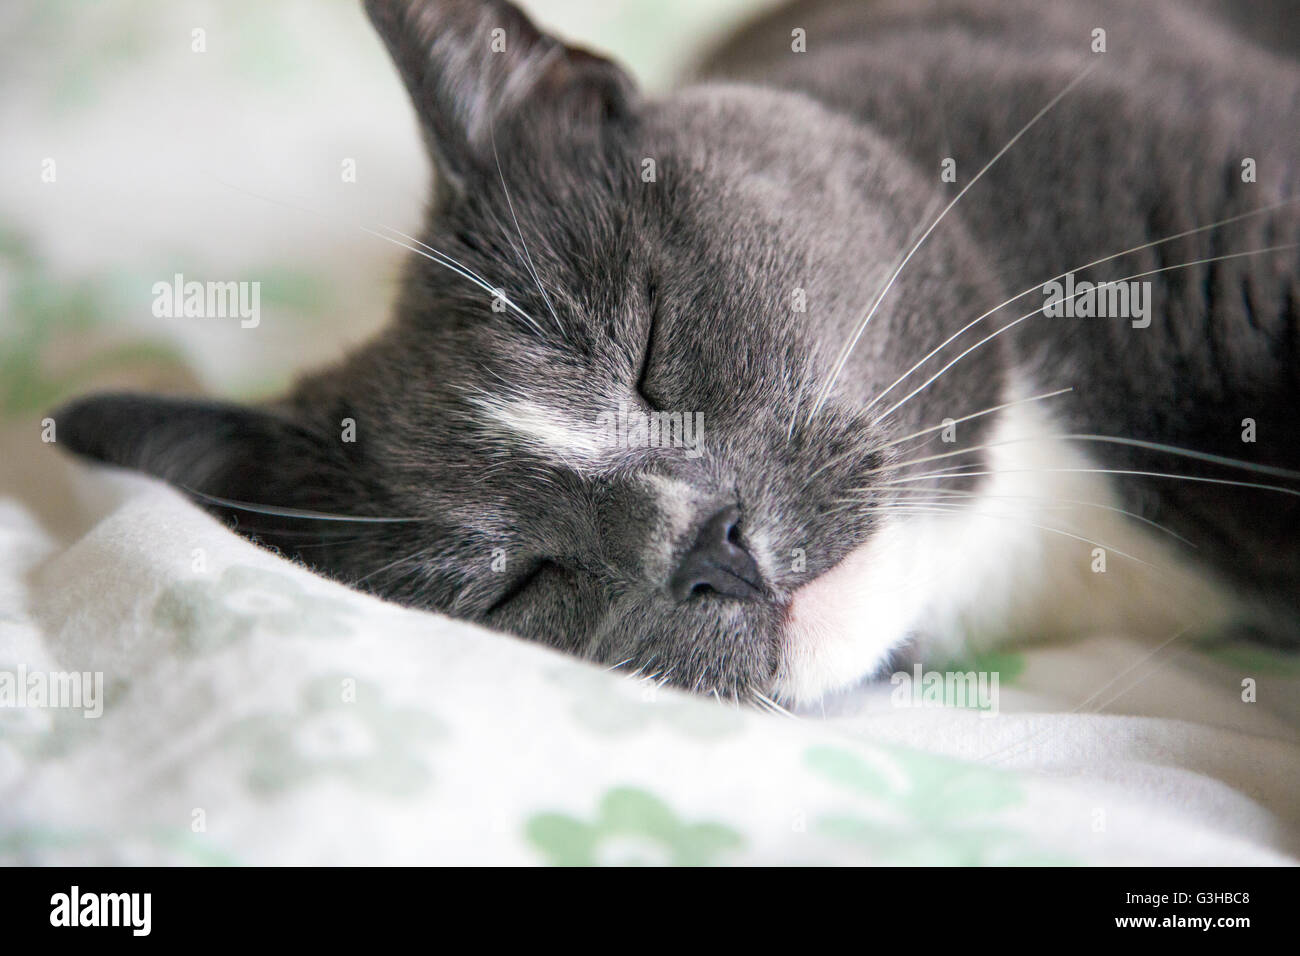 Close-up of a cat sleeping in bed Stock Photo